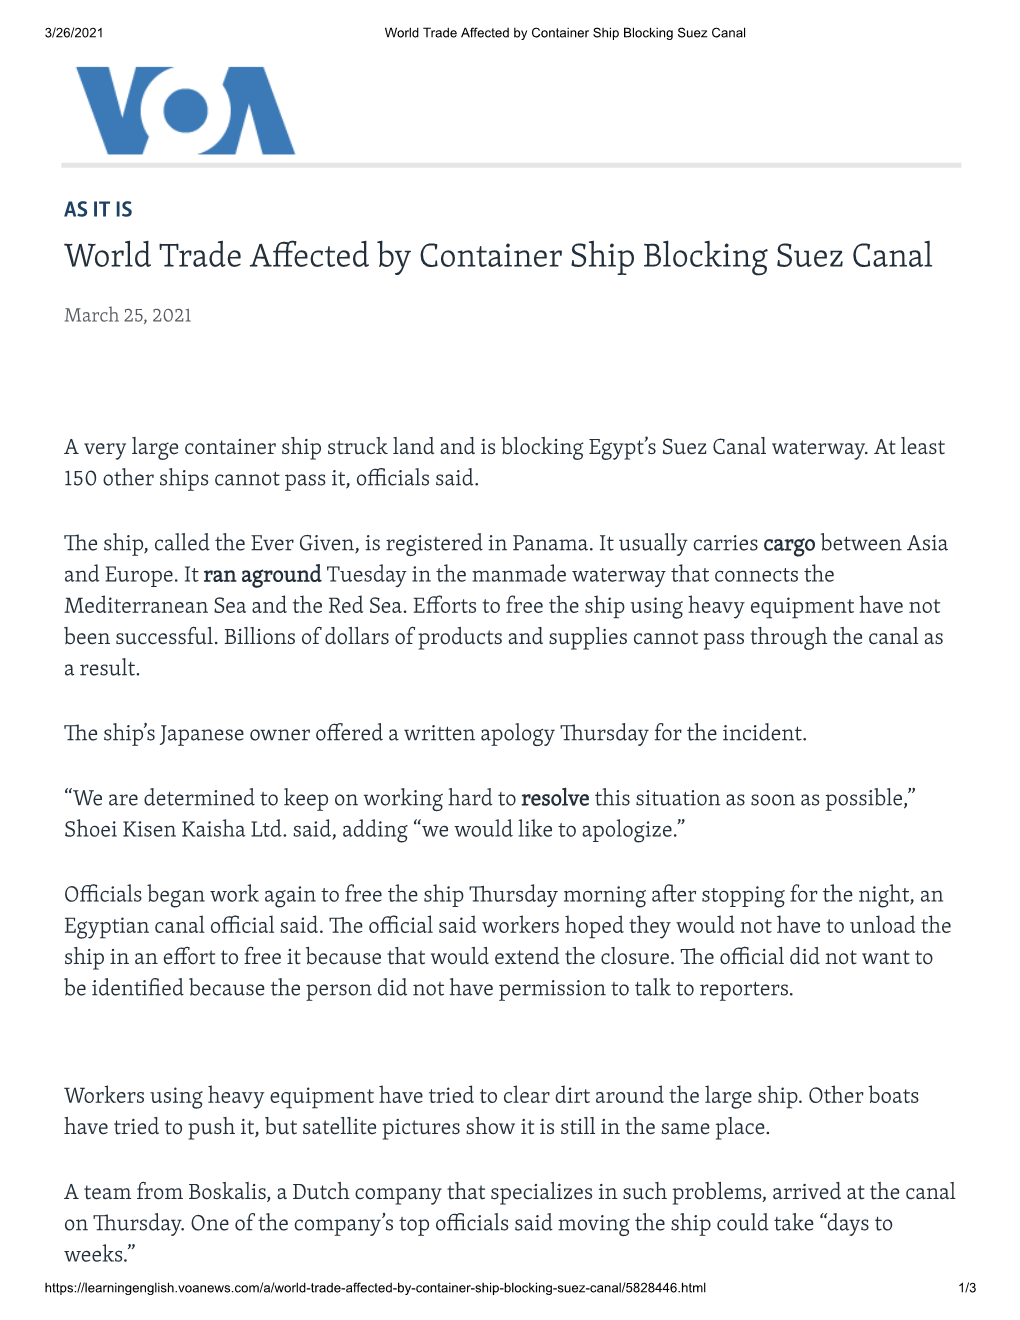 World Trade a Ected by Container Ship Blocking Suez Canal